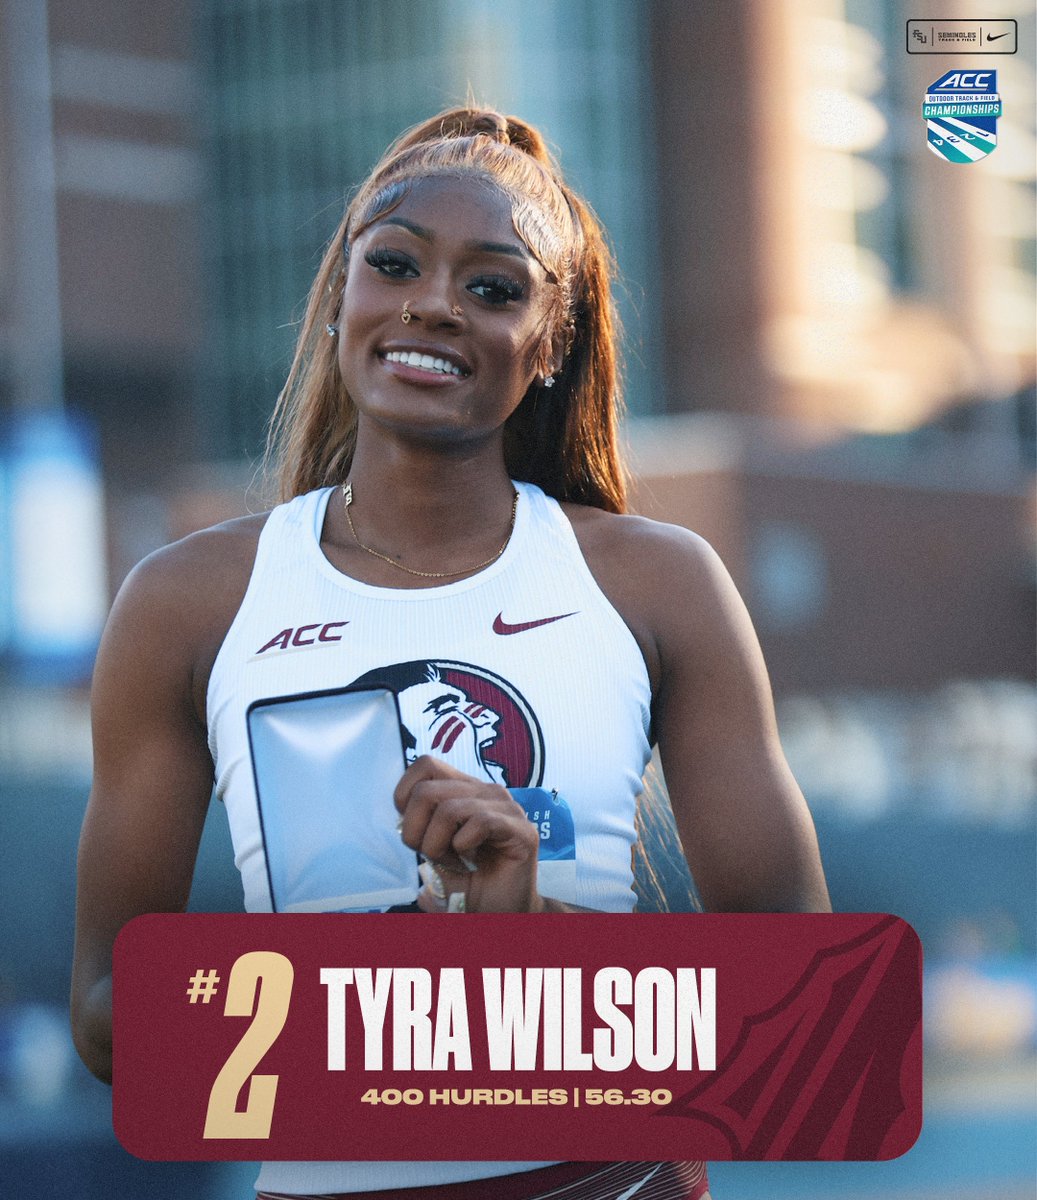 𝐓𝐘𝐑𝐀𝐀𝐀!! Tyra Wilson places second in the 400m hurdles, establishing a lifetime best of 56.30! #OneTribe | #GoNoles